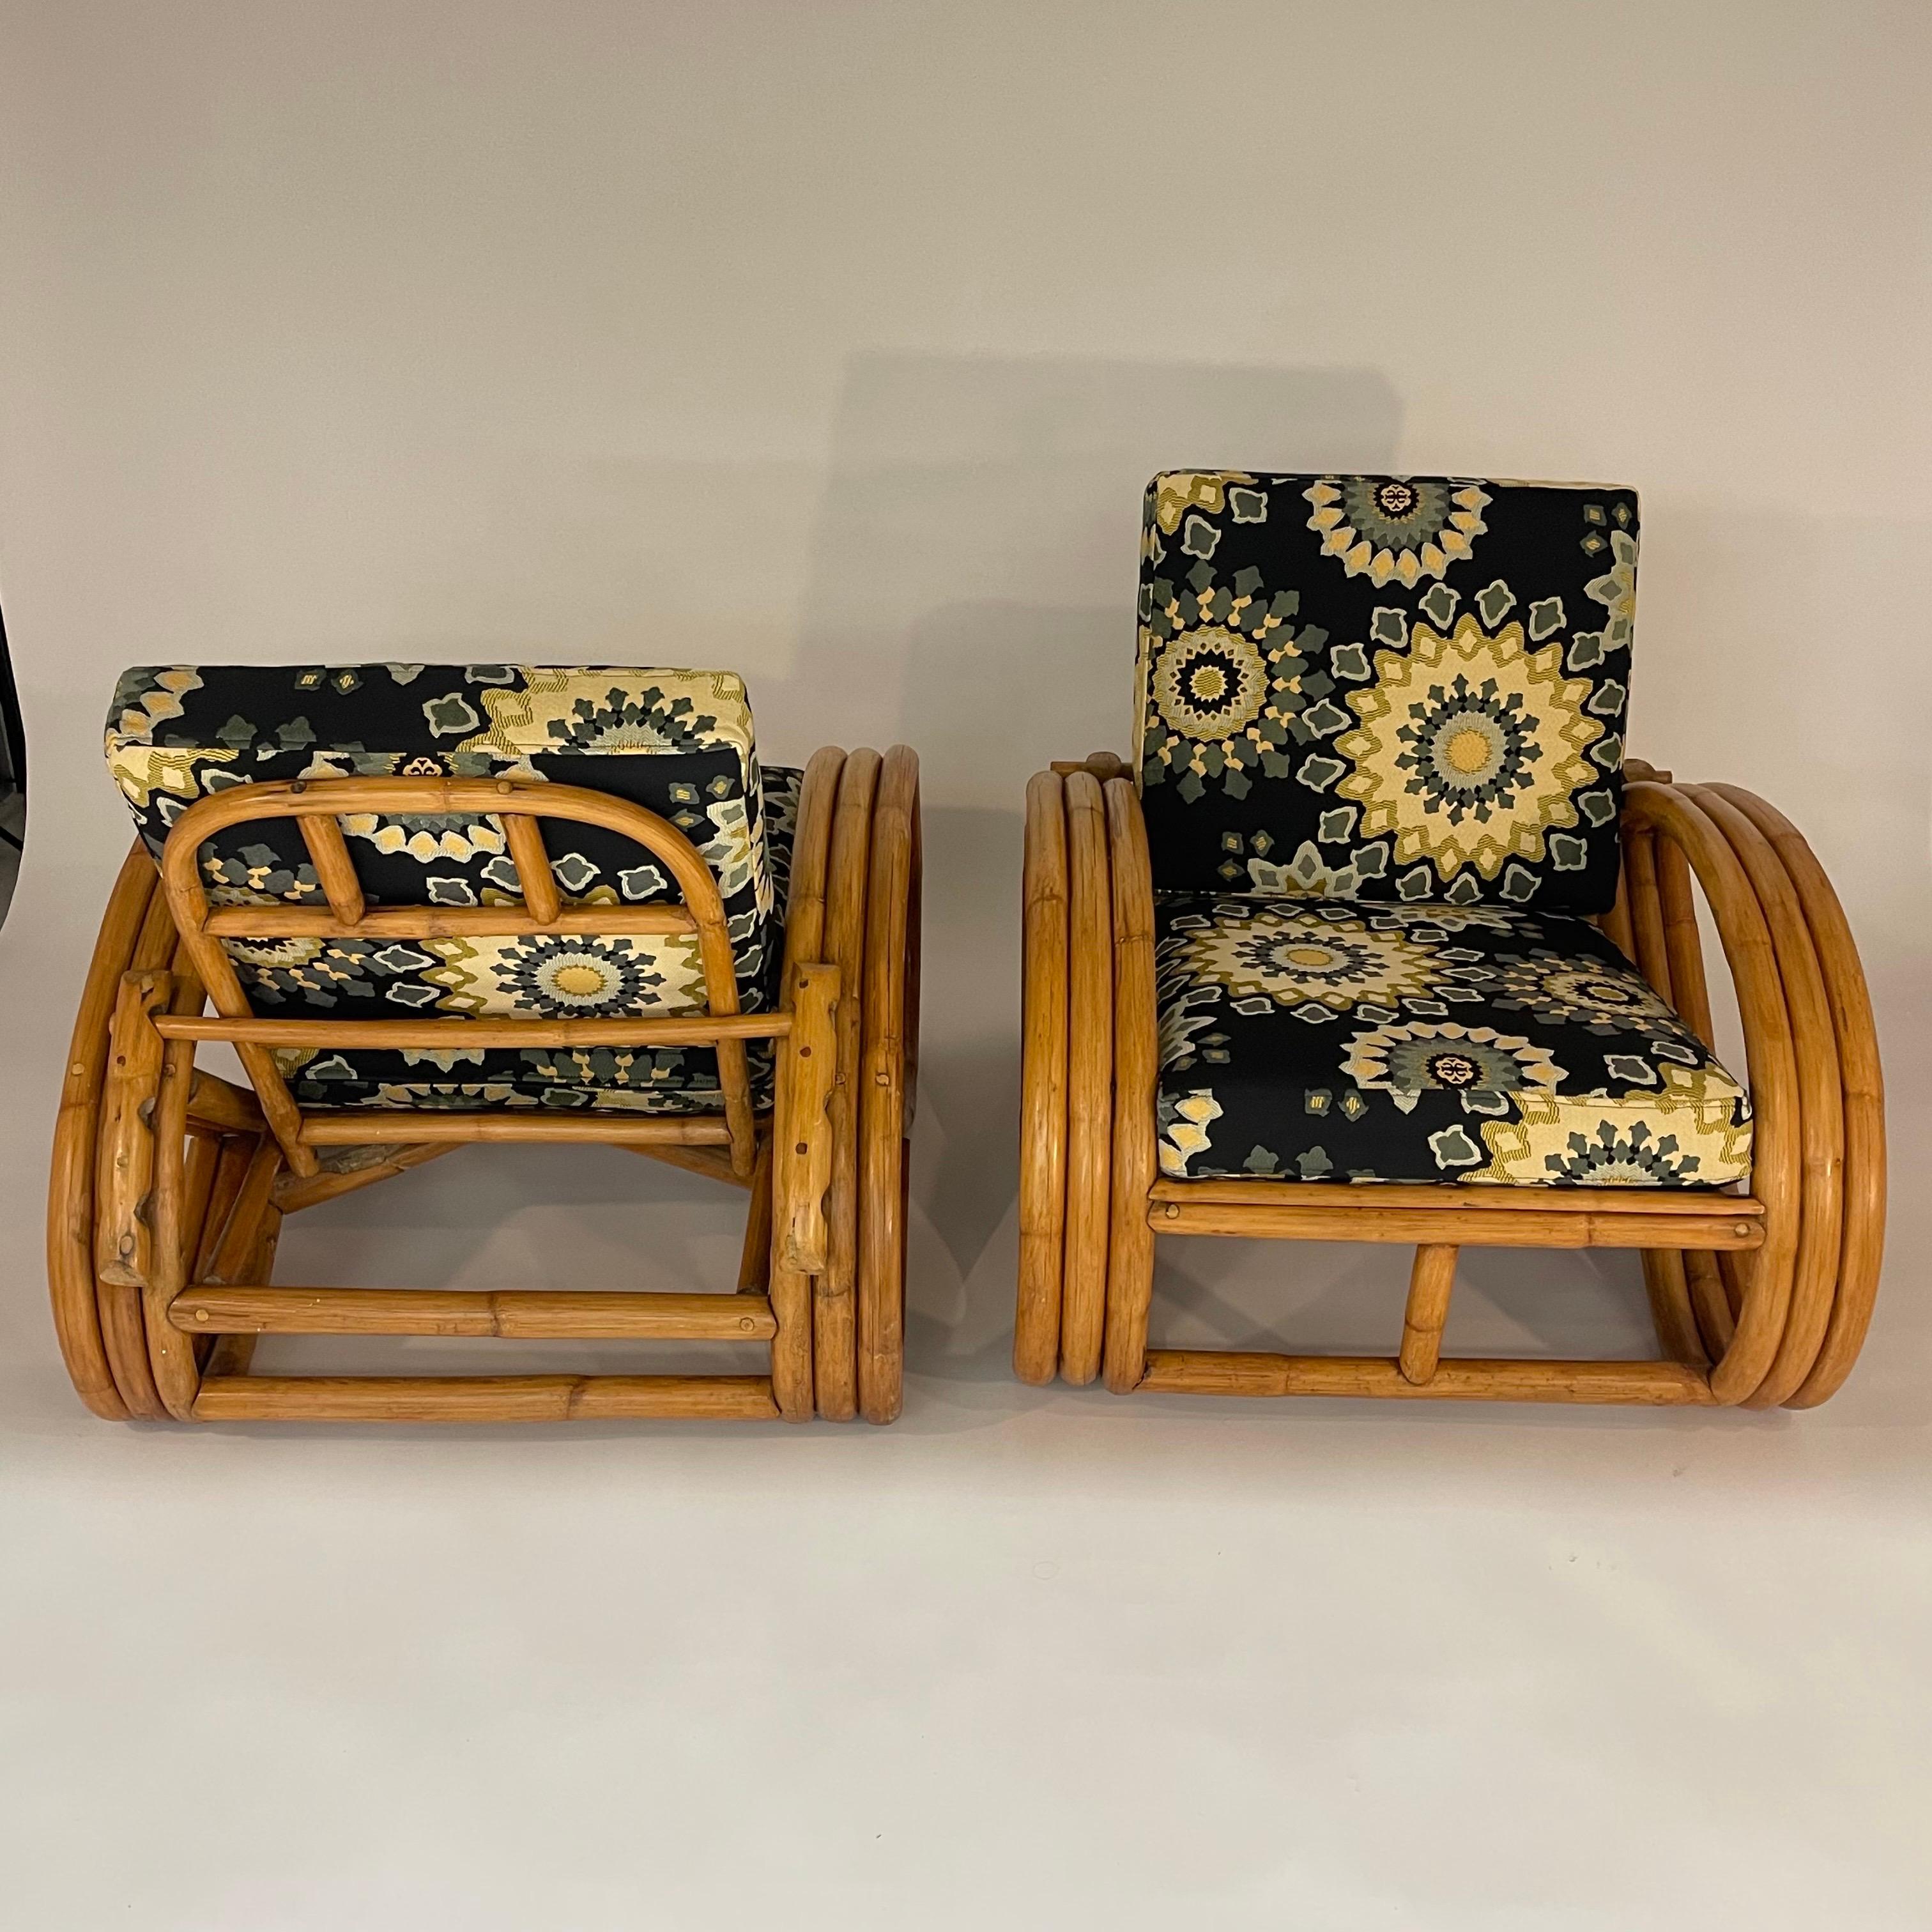 Art Deco Pair of Paul Frankl Style Pretzel Club or Lounge Chairs, USA, 1940s For Sale 2